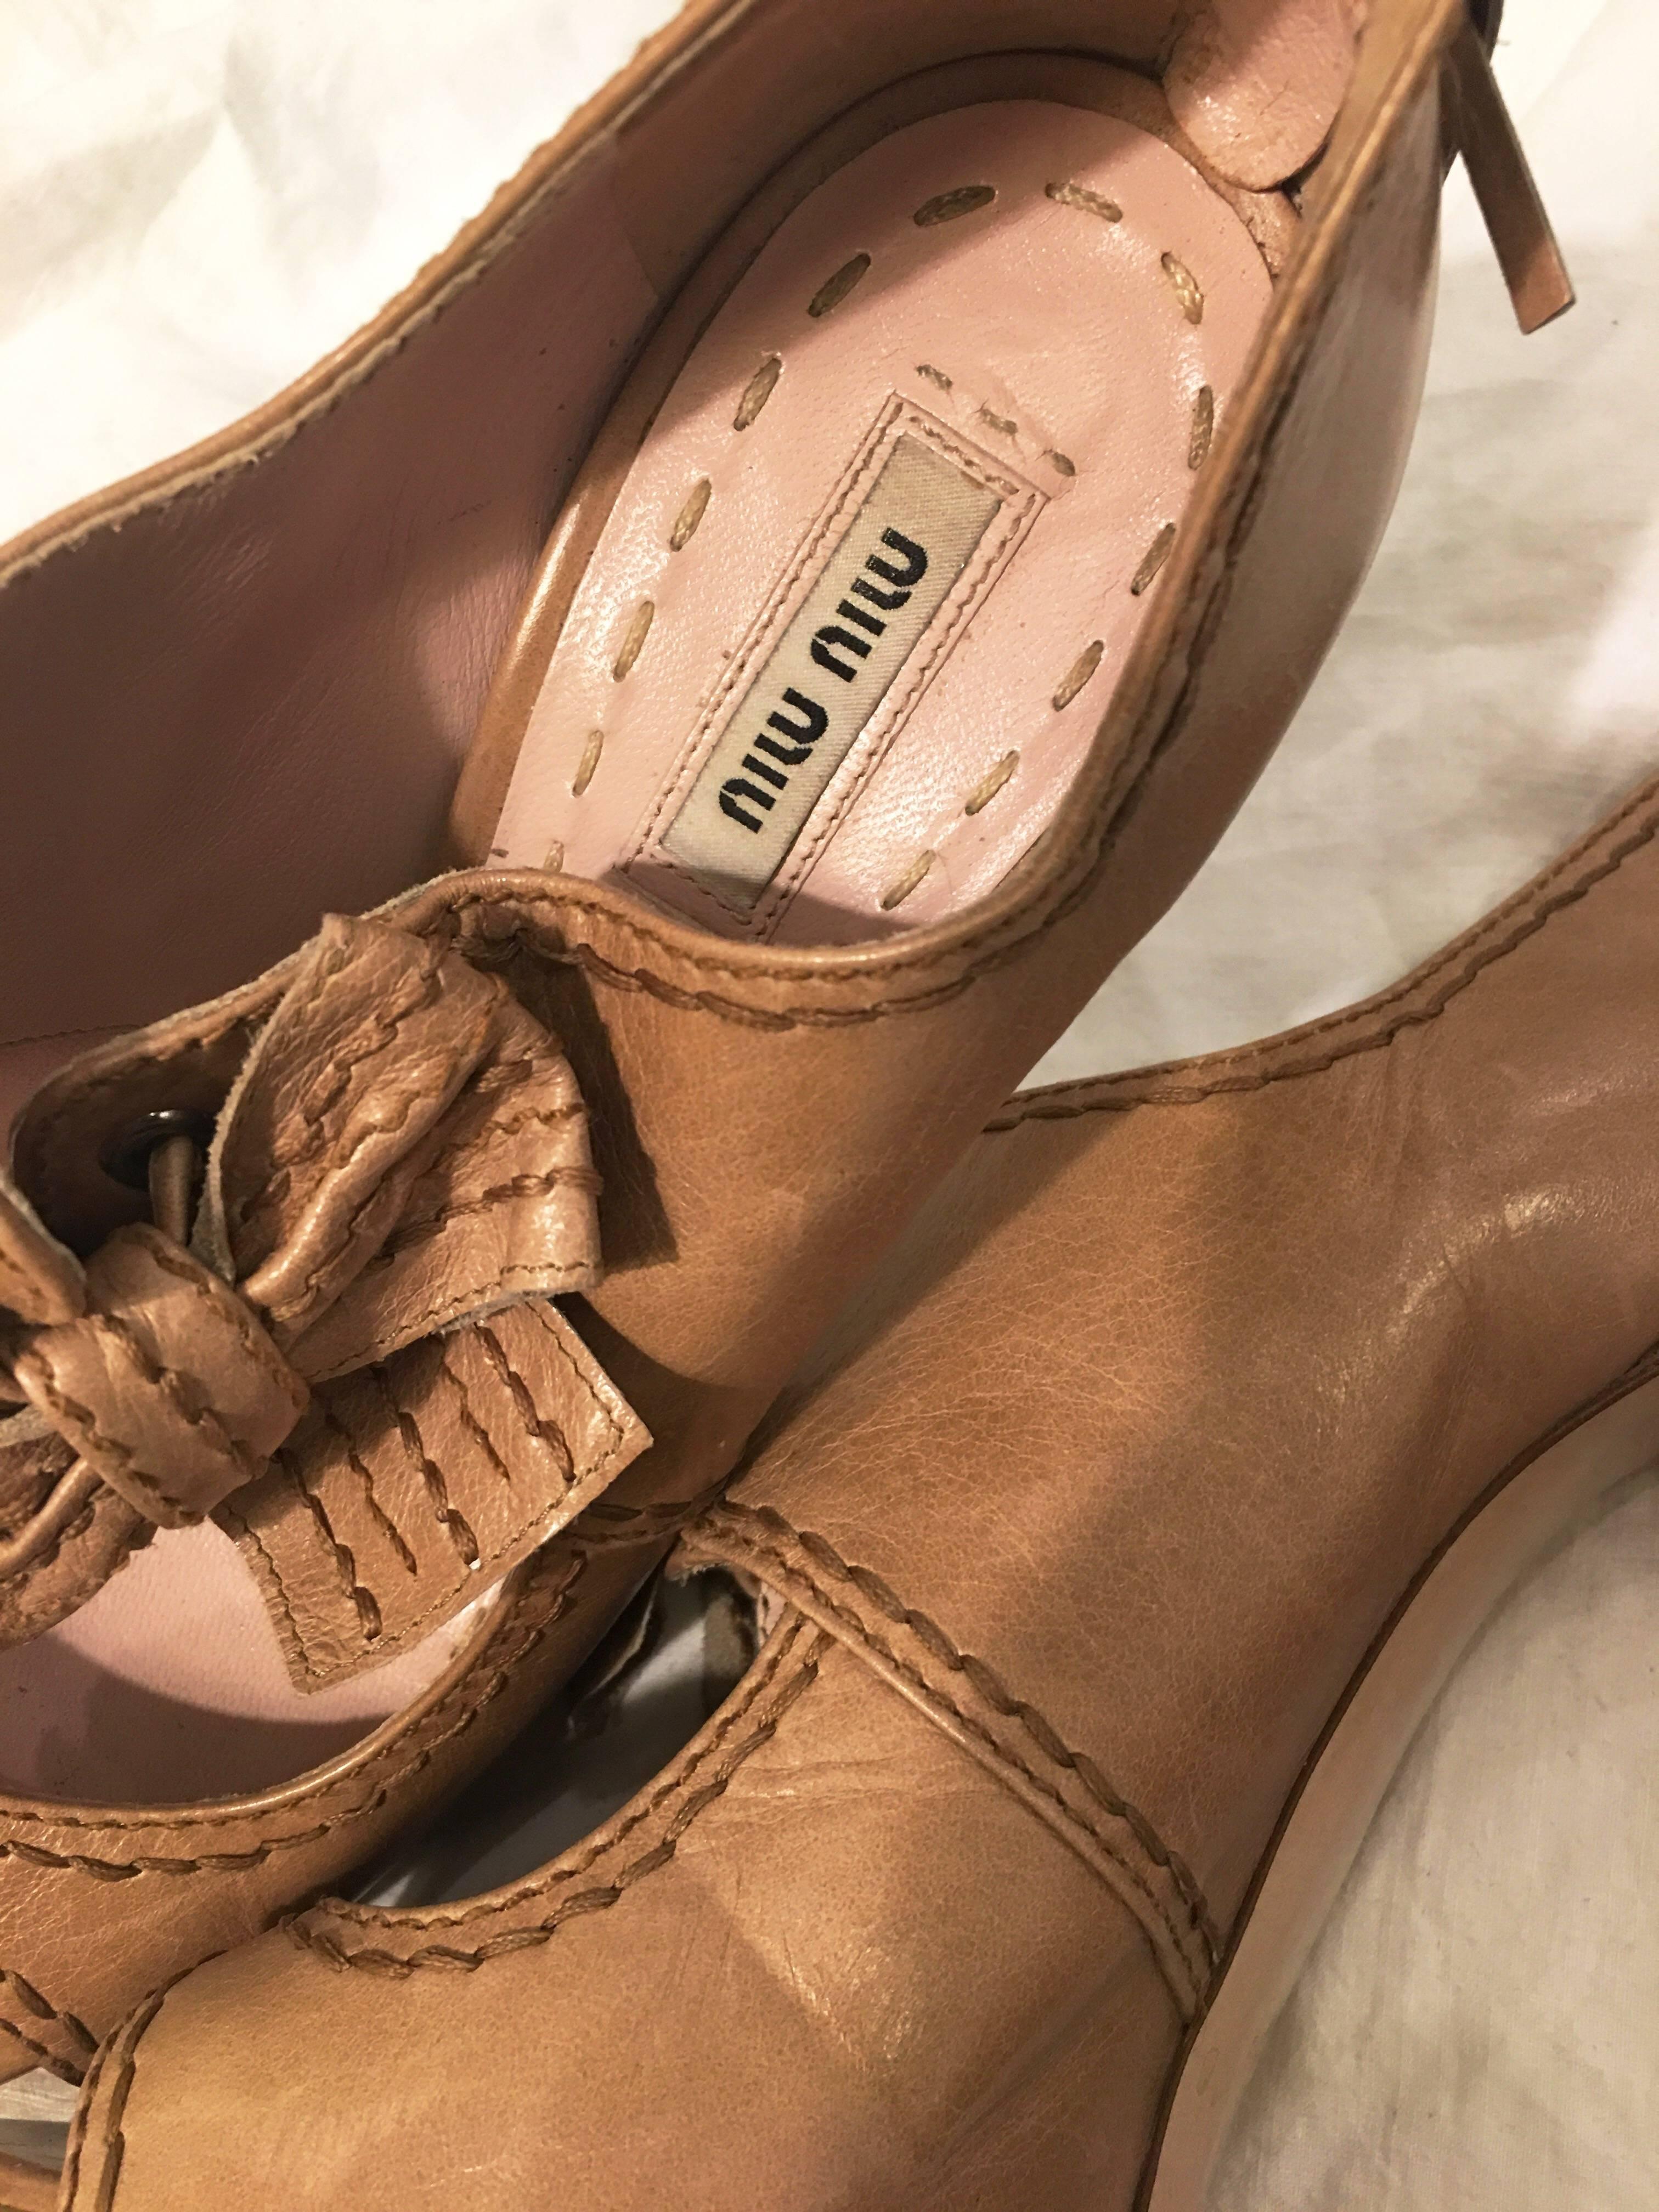 Miu Miu Beige “Mary Jane” Open Toe with Bow Pumps For Sale 3